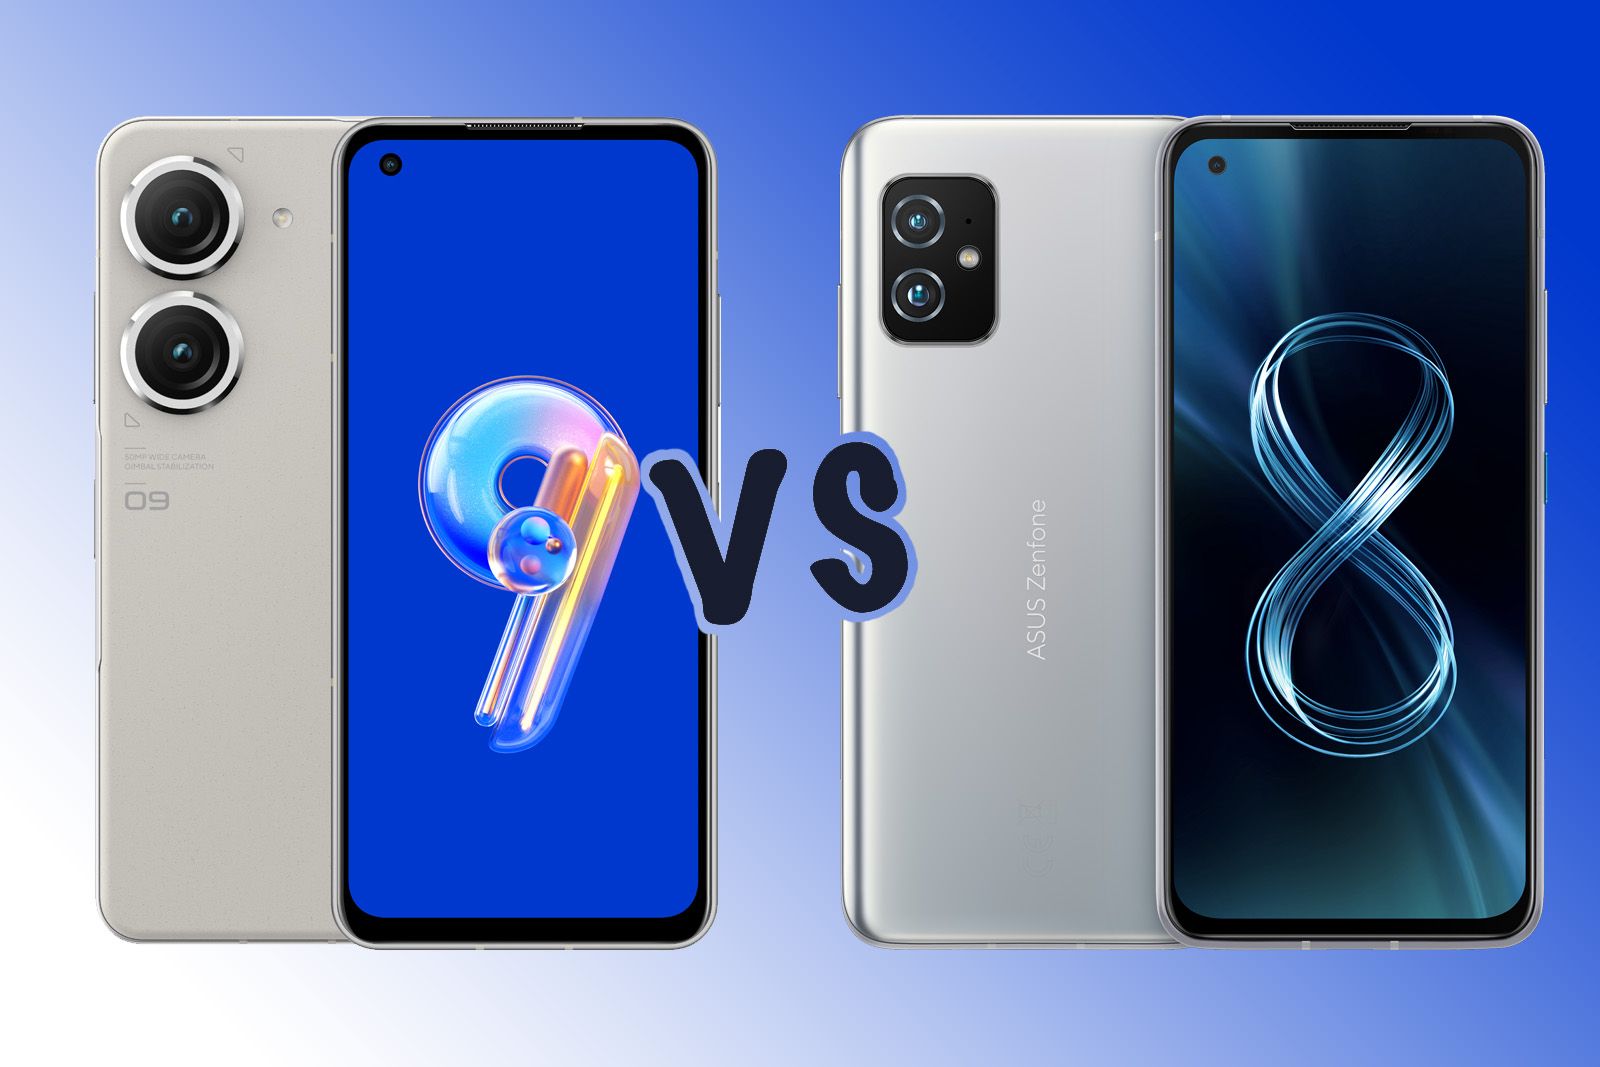 Asus Zenfone 9 vs Zenfone 8: What's the difference?